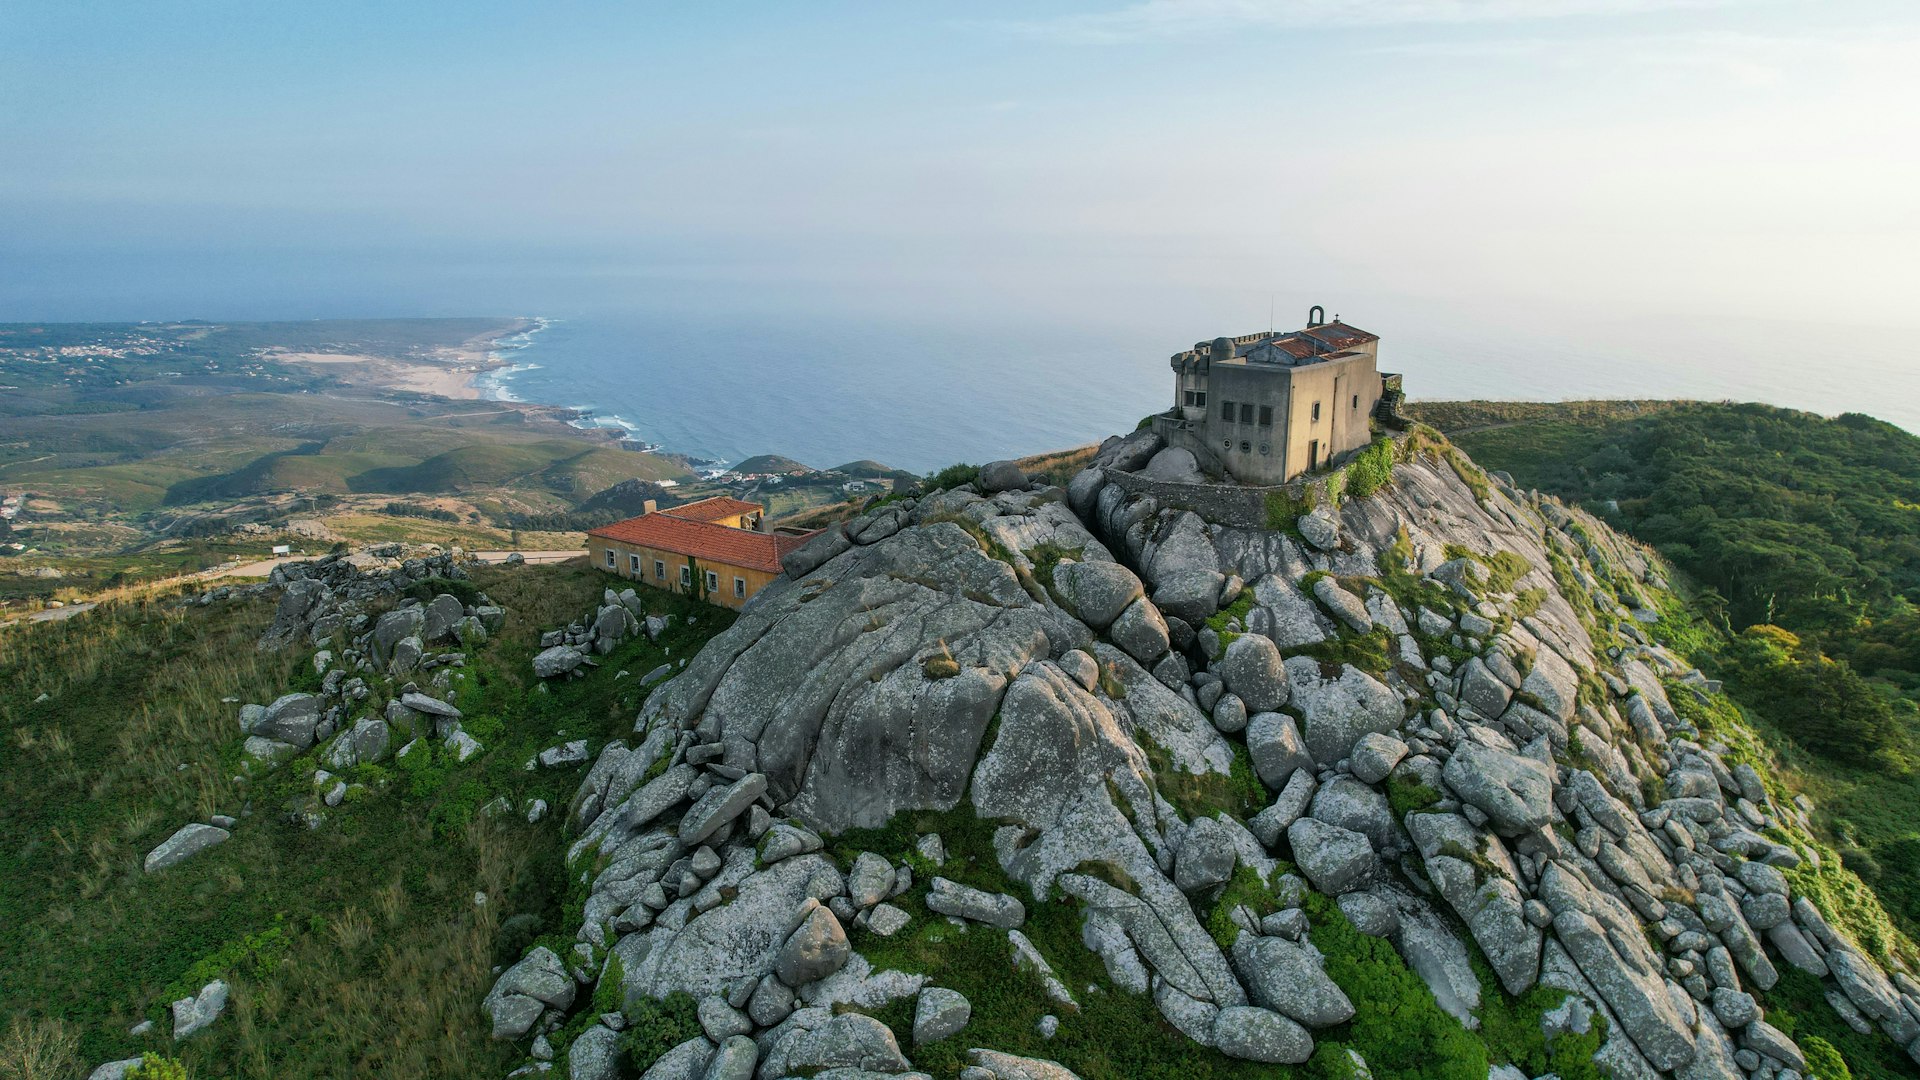 An aerial view of Santuário da Peninha, which sits on a mountain on the coast in Sintra